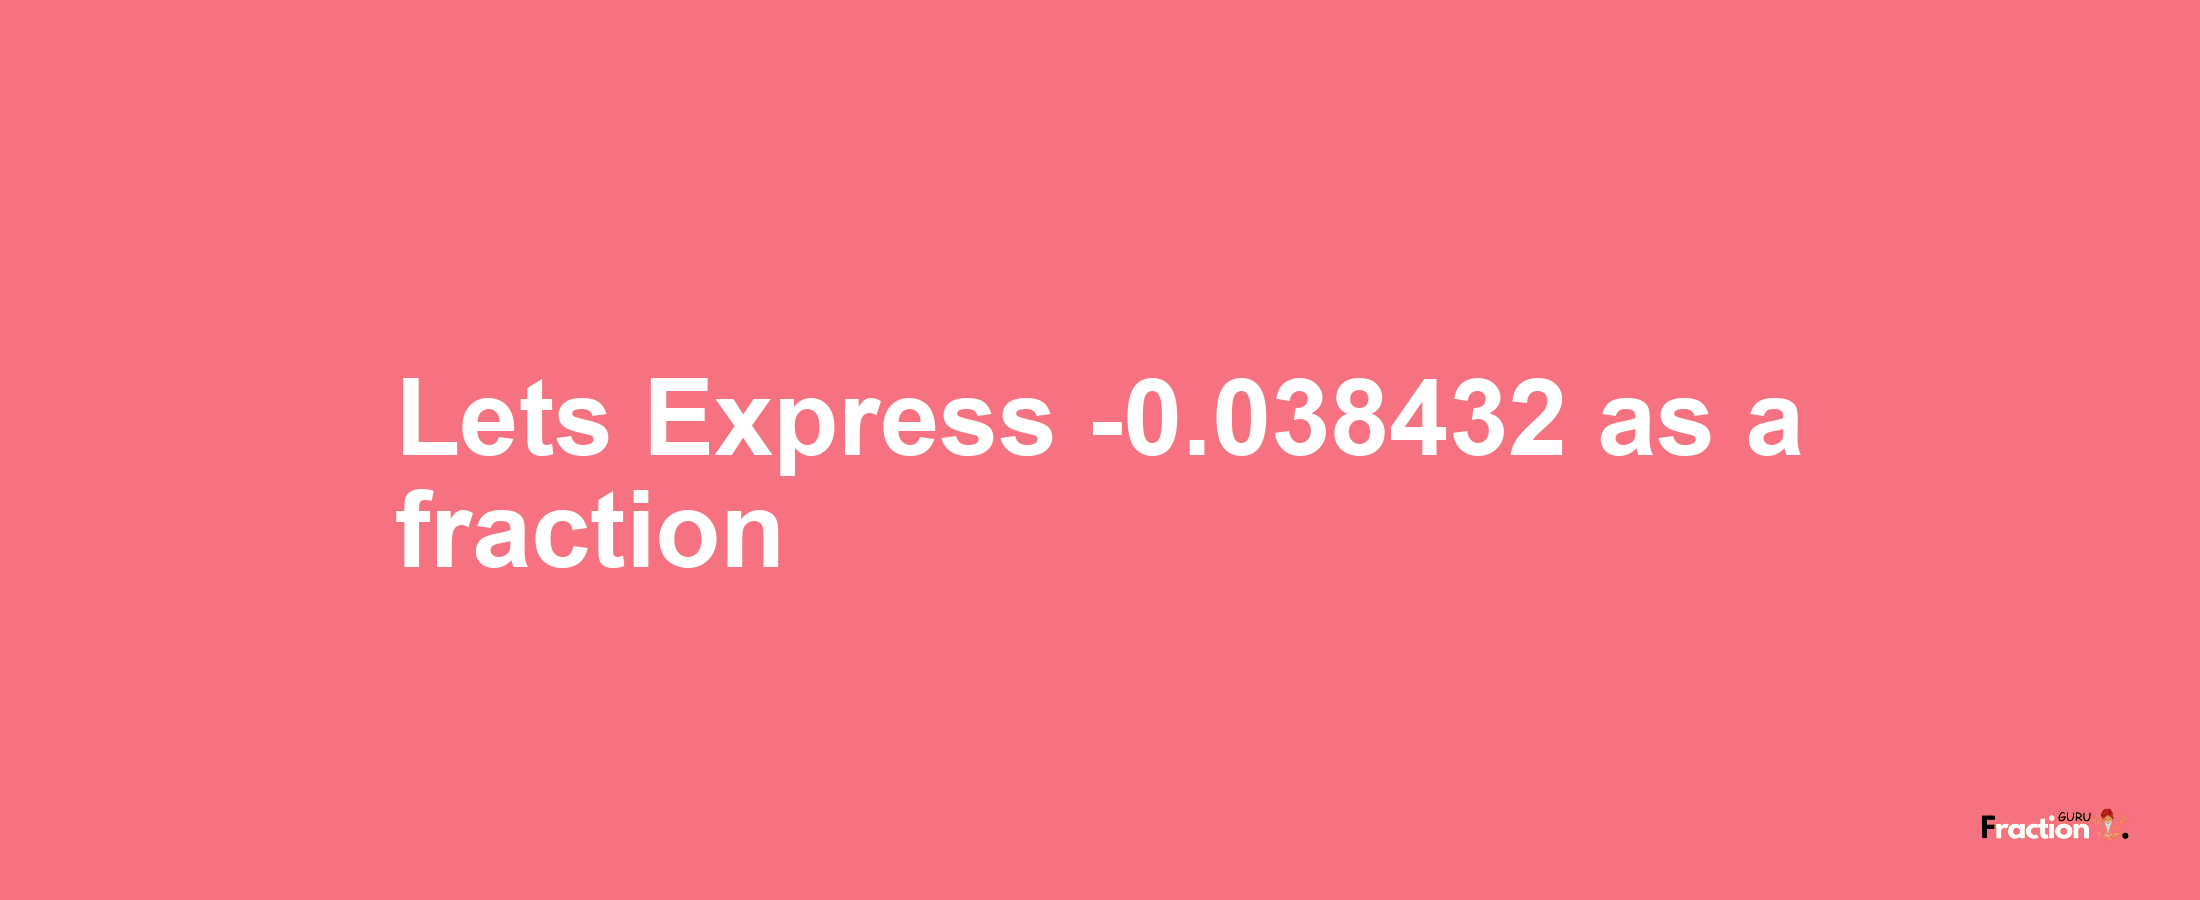 Lets Express -0.038432 as afraction